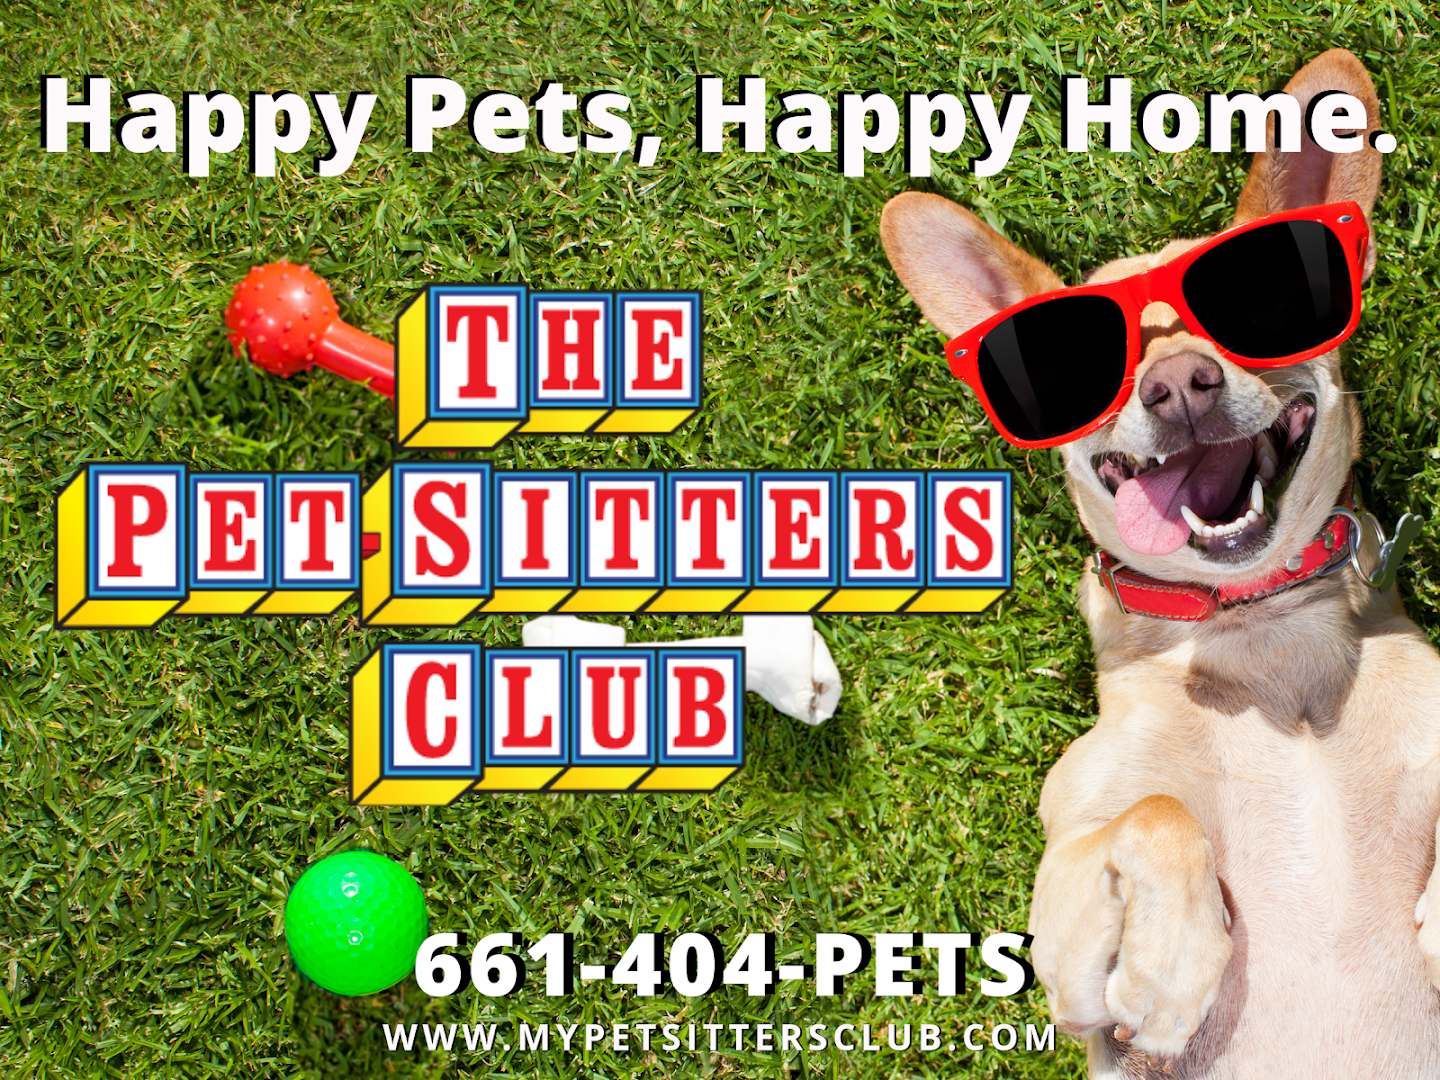 The Pet Sitters Club